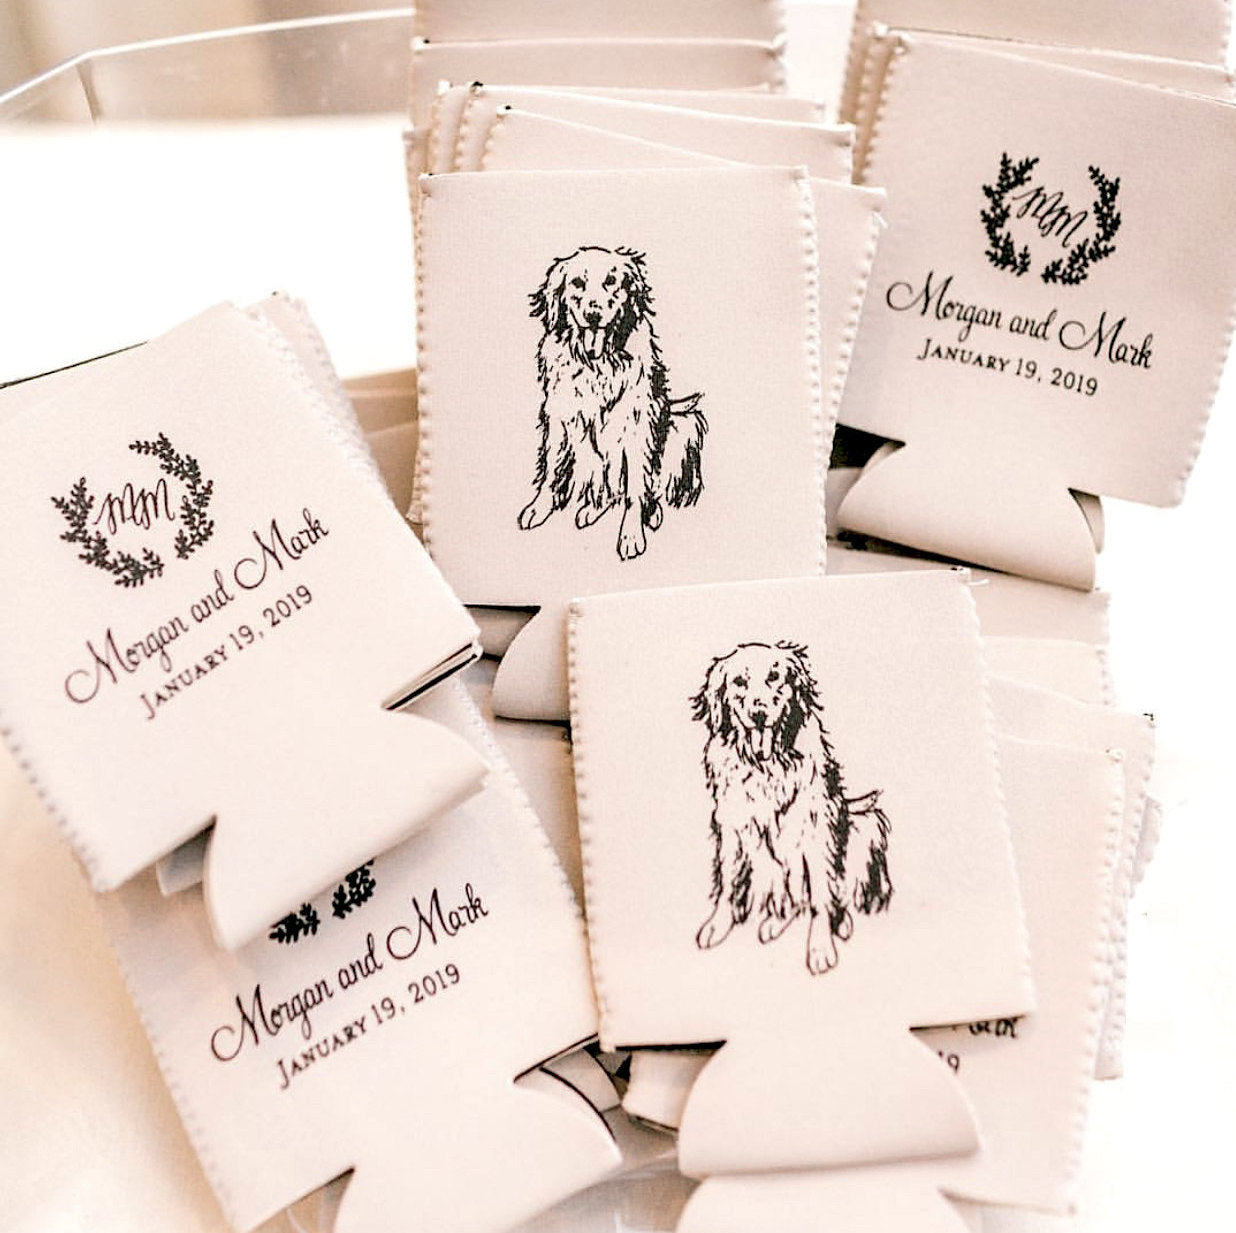 Neoprene Hand-Drawn Pet Sketch Can Coolers